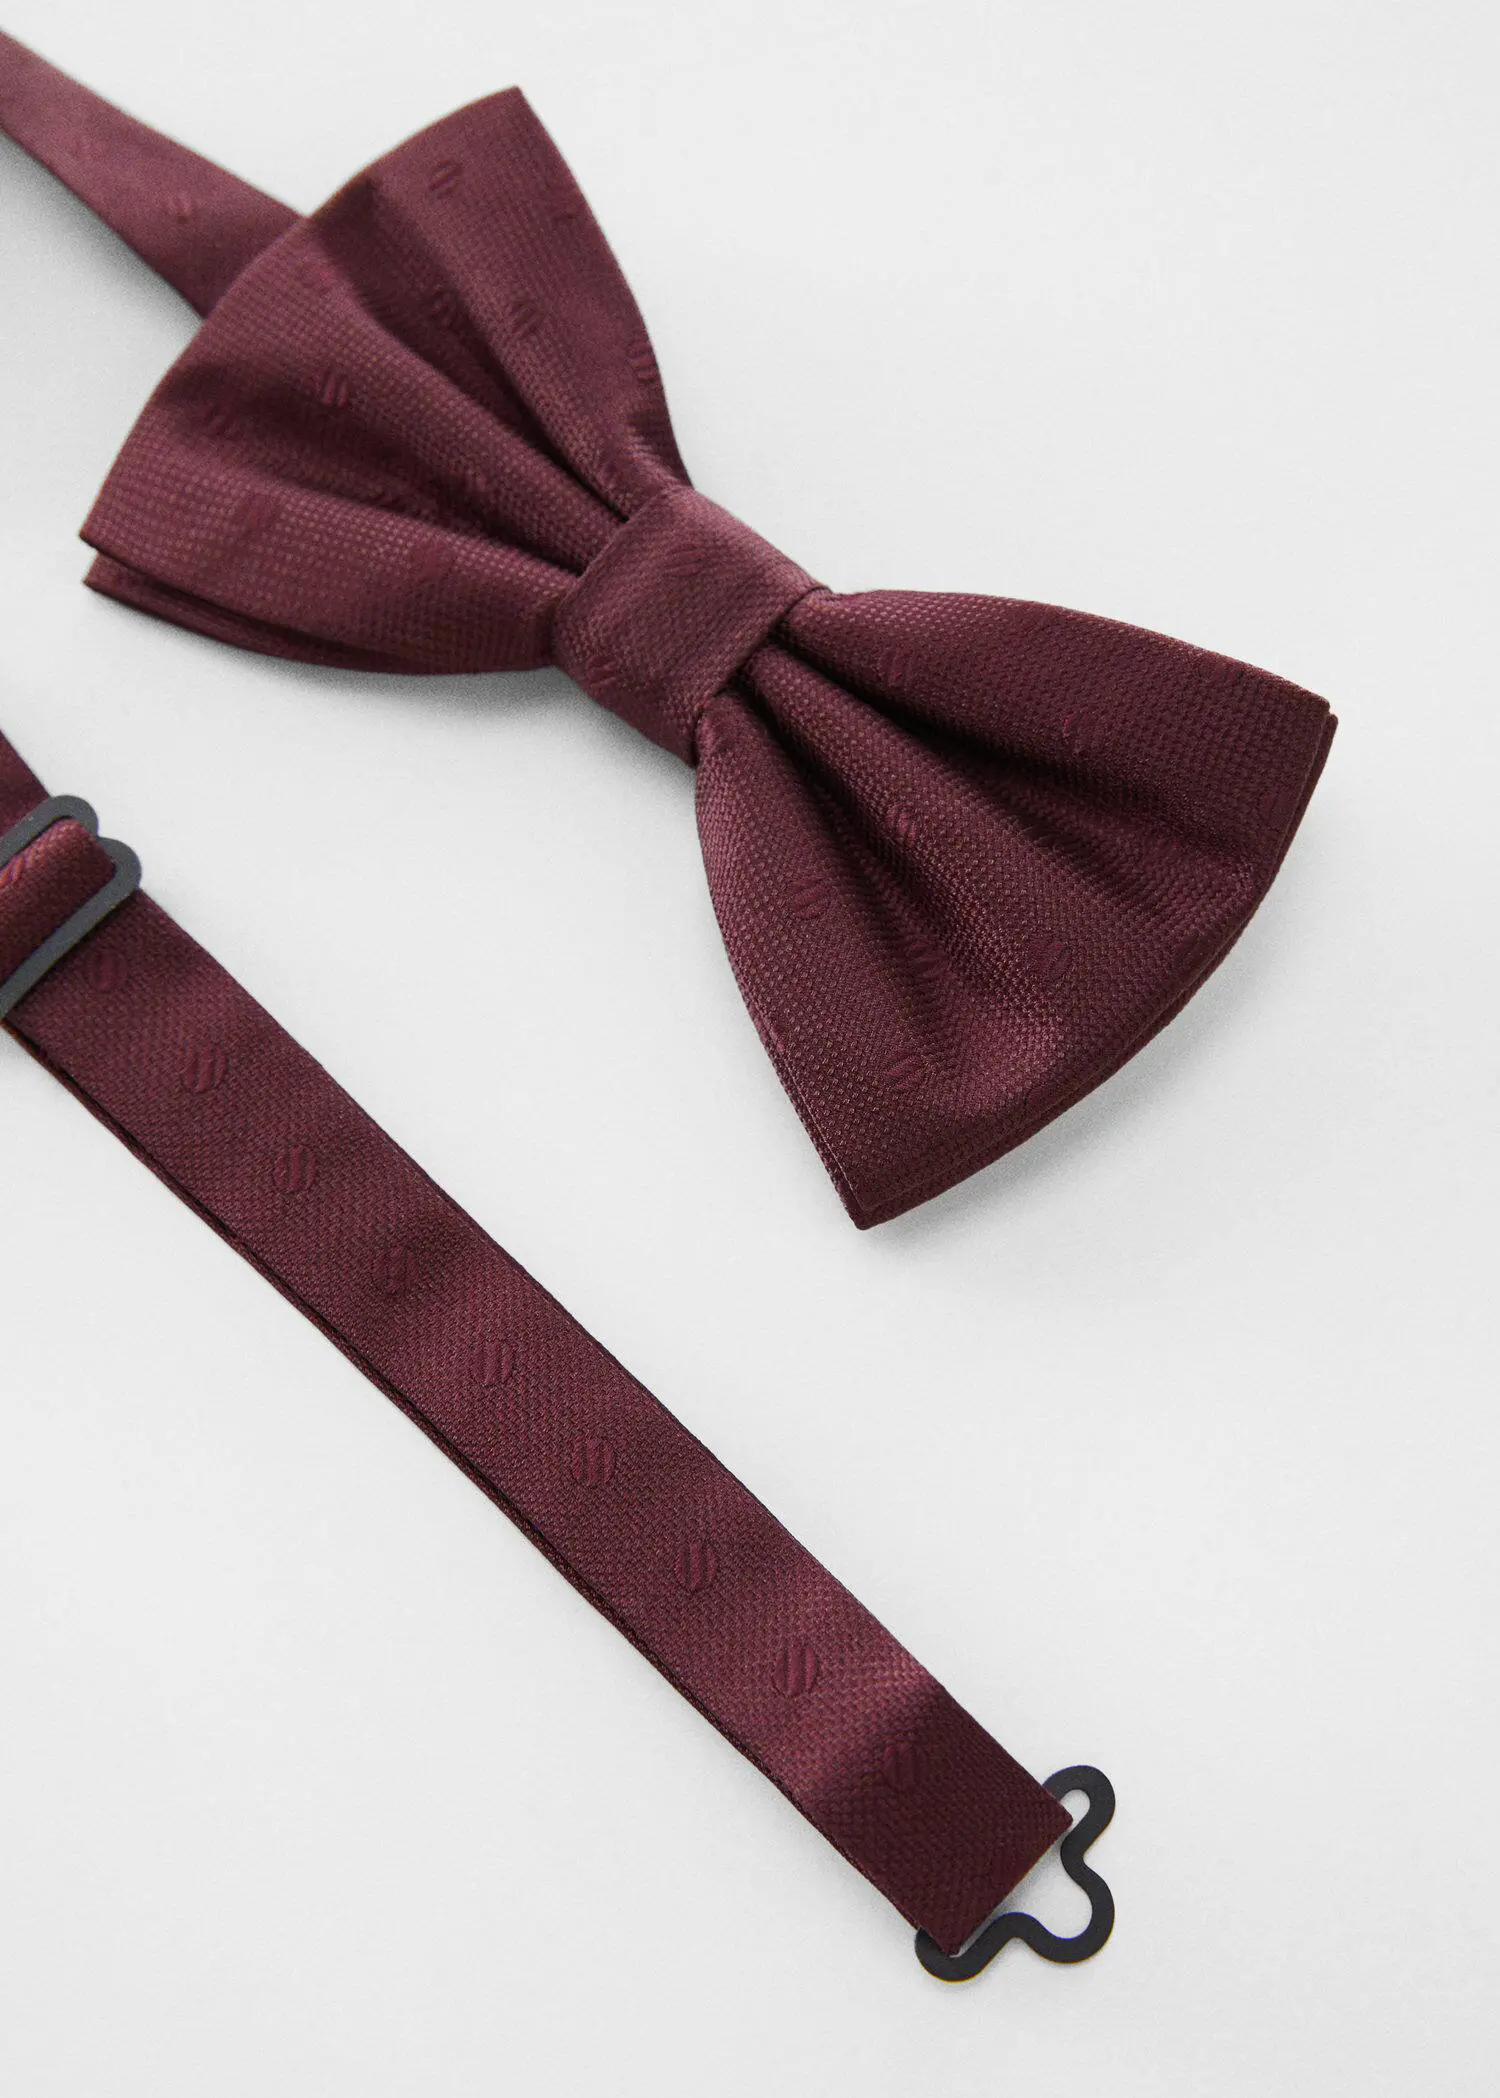 Mango Bow tie with polka-dot structure. a maroon bow tie and a maroon suspenders. 